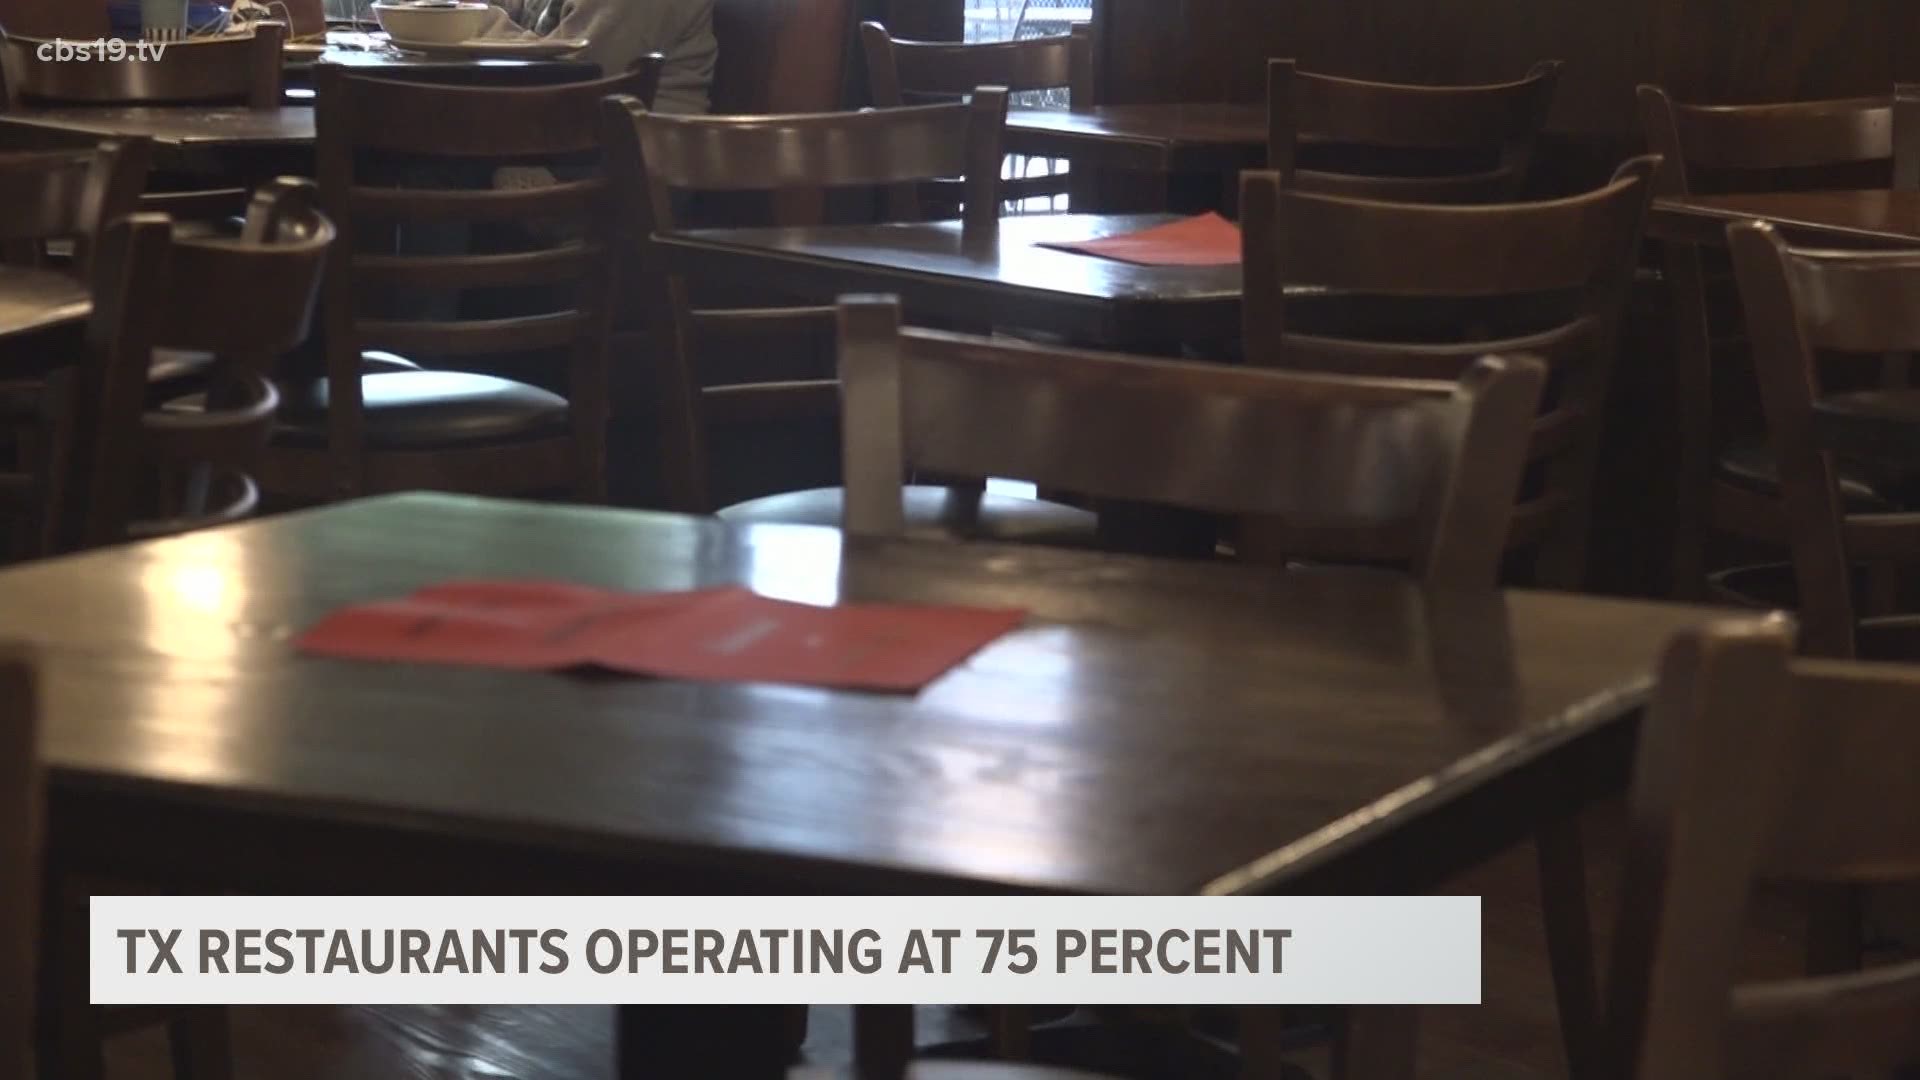 Larger restaurants love the increase in customers but for smaller eateries, the percentages don't add up.